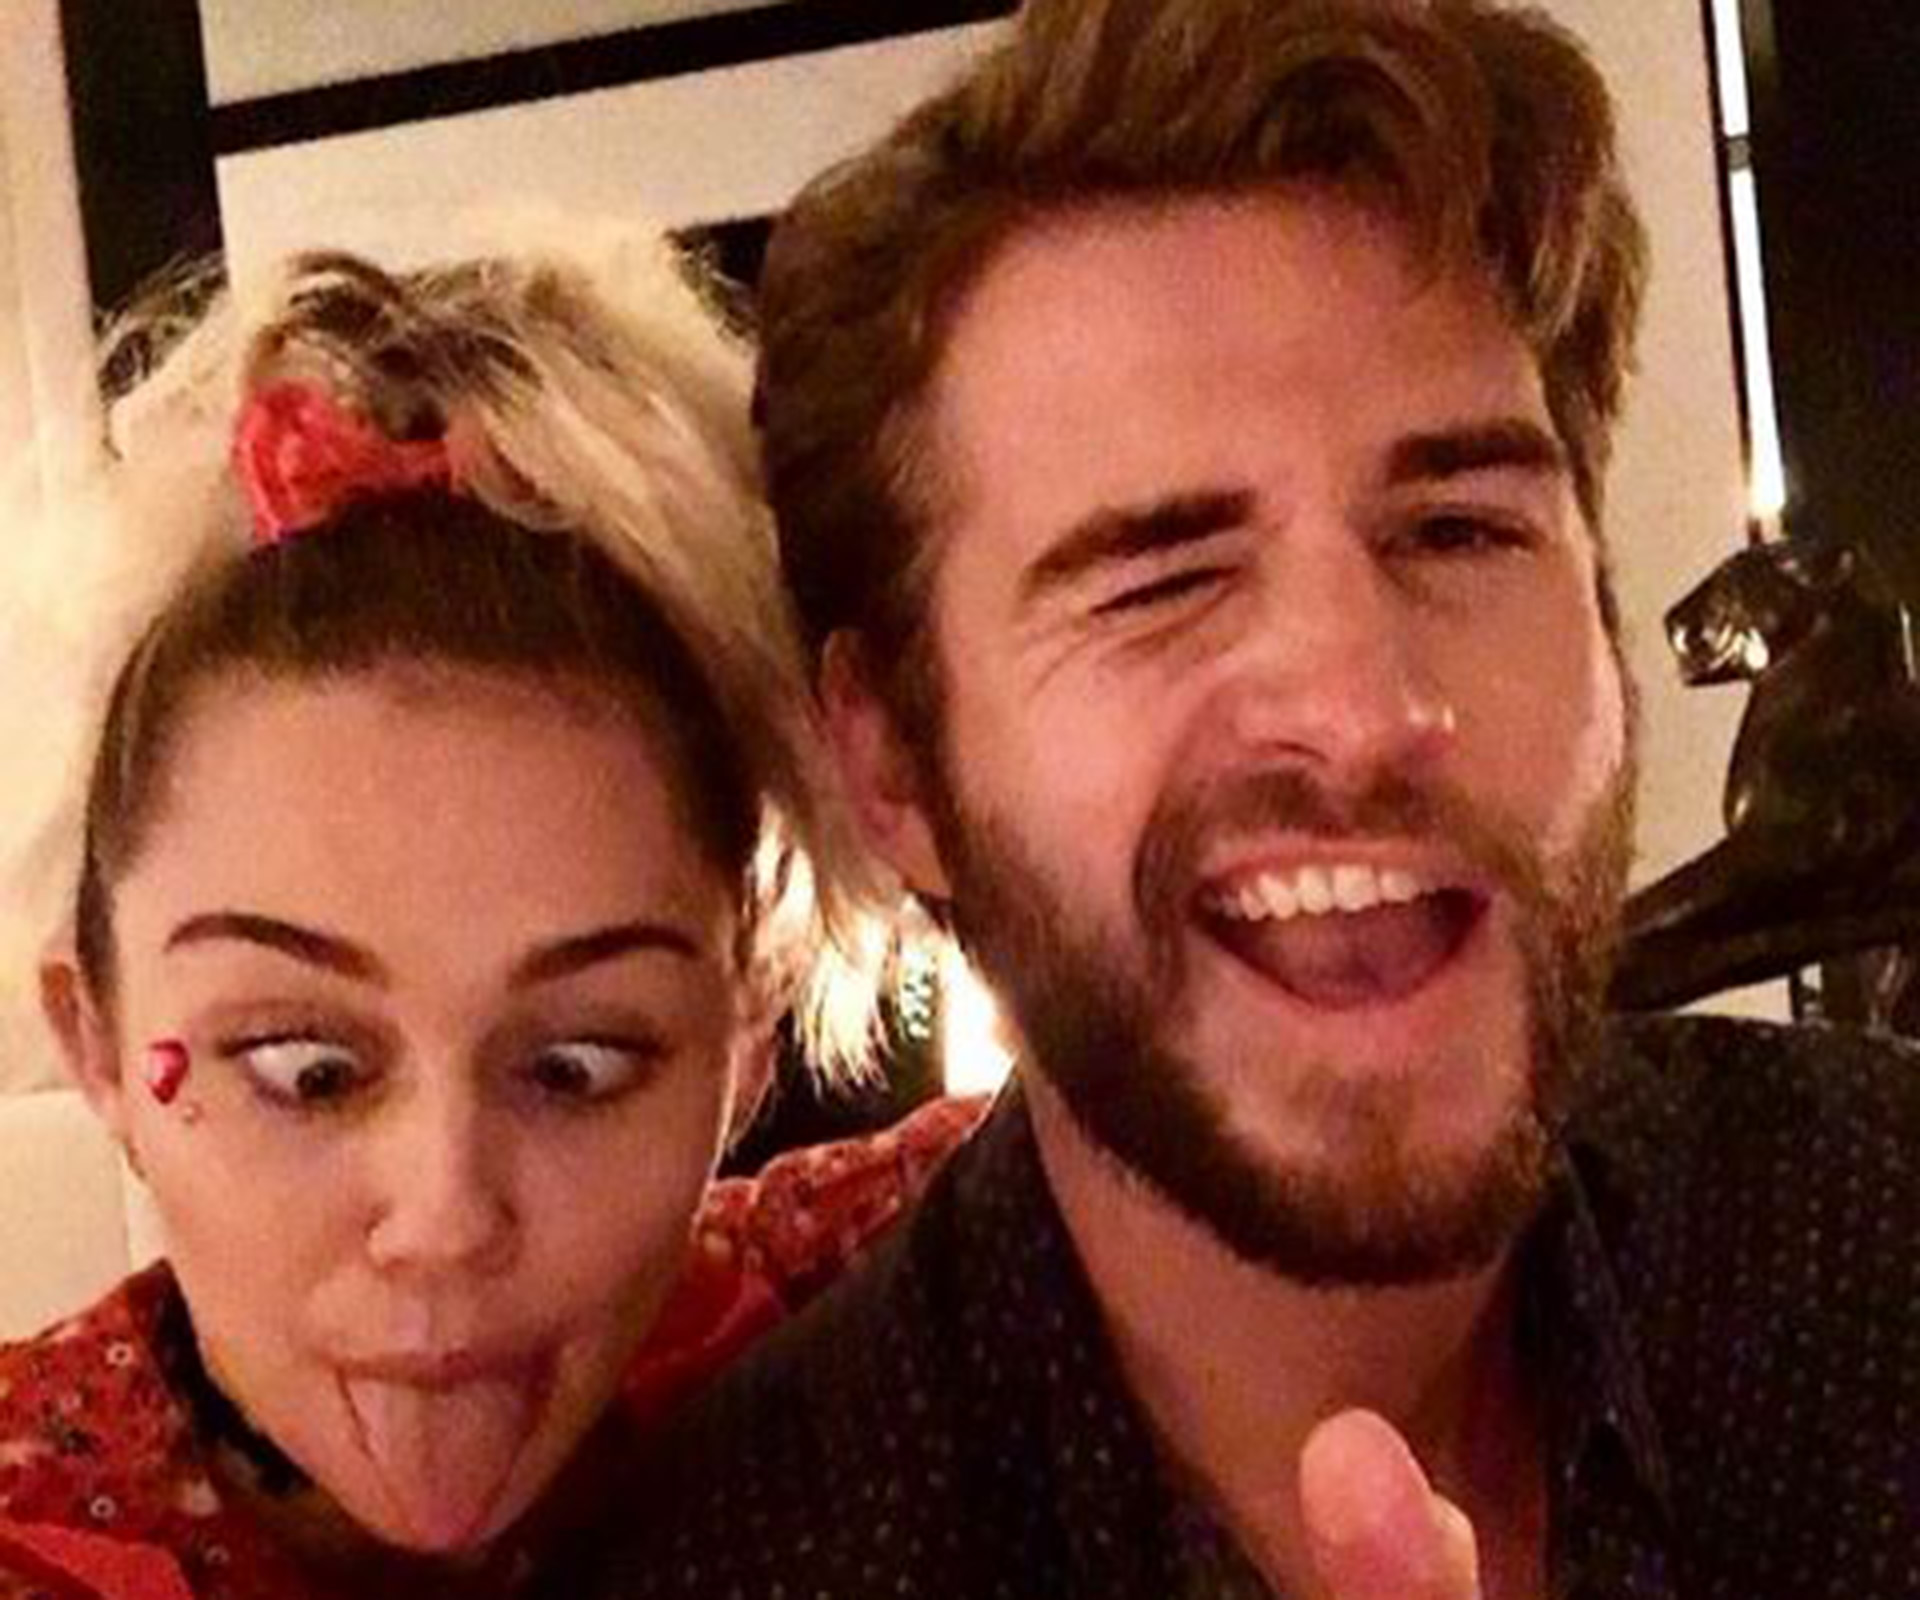 Miley Cyrus gives her most intense interview yet – talks drugs and Liam Hemsworth break-up